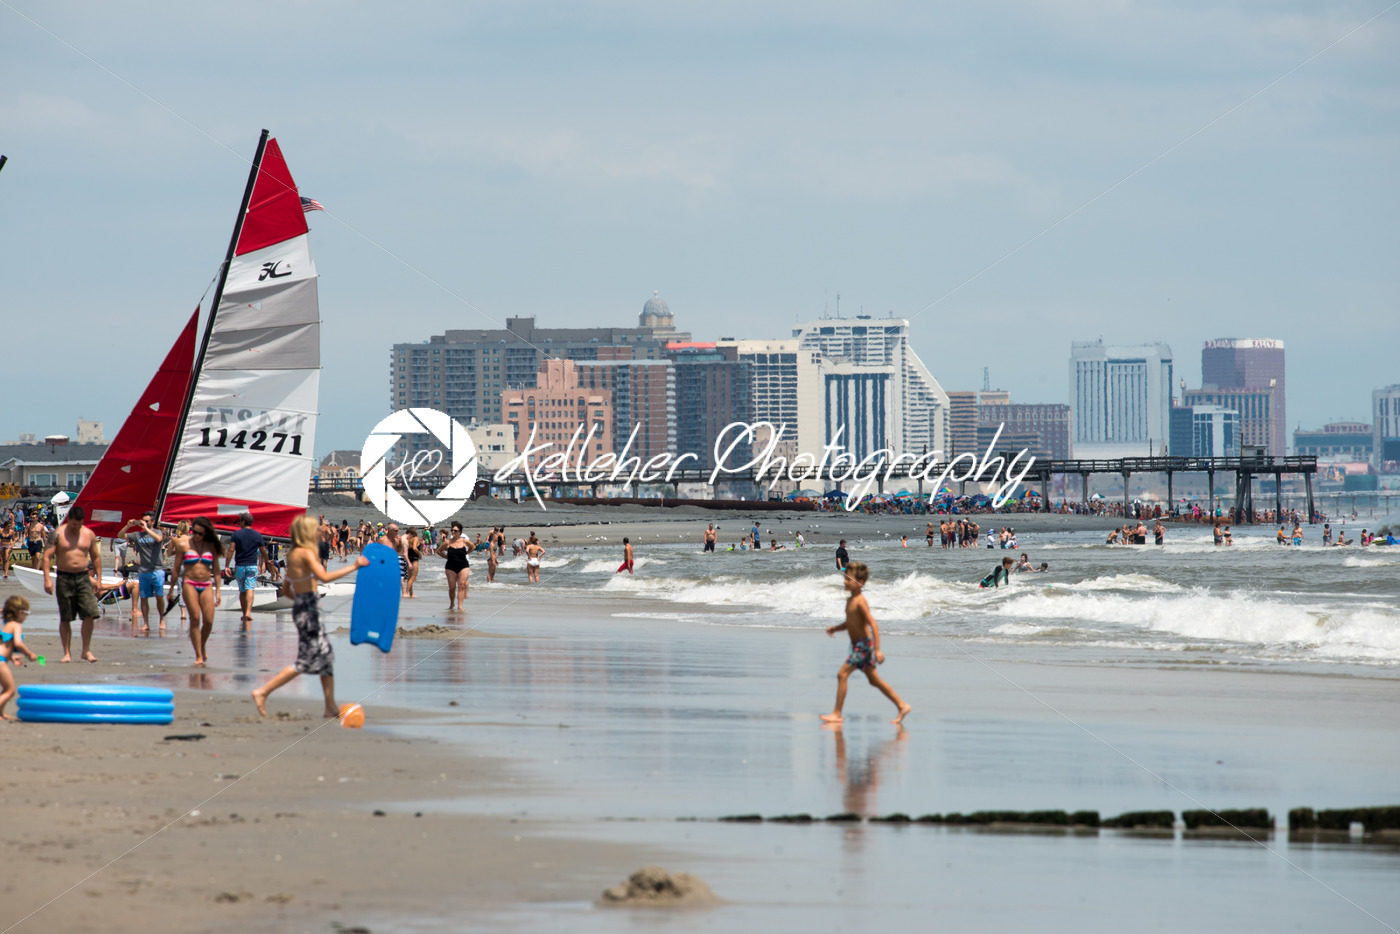 ATLANTIC CITY, NJ – AUGUST 8: The skyline and Atlantic Ocean in Atlantic City, New Jersey on August 8, 2017 - Kelleher Photography Store